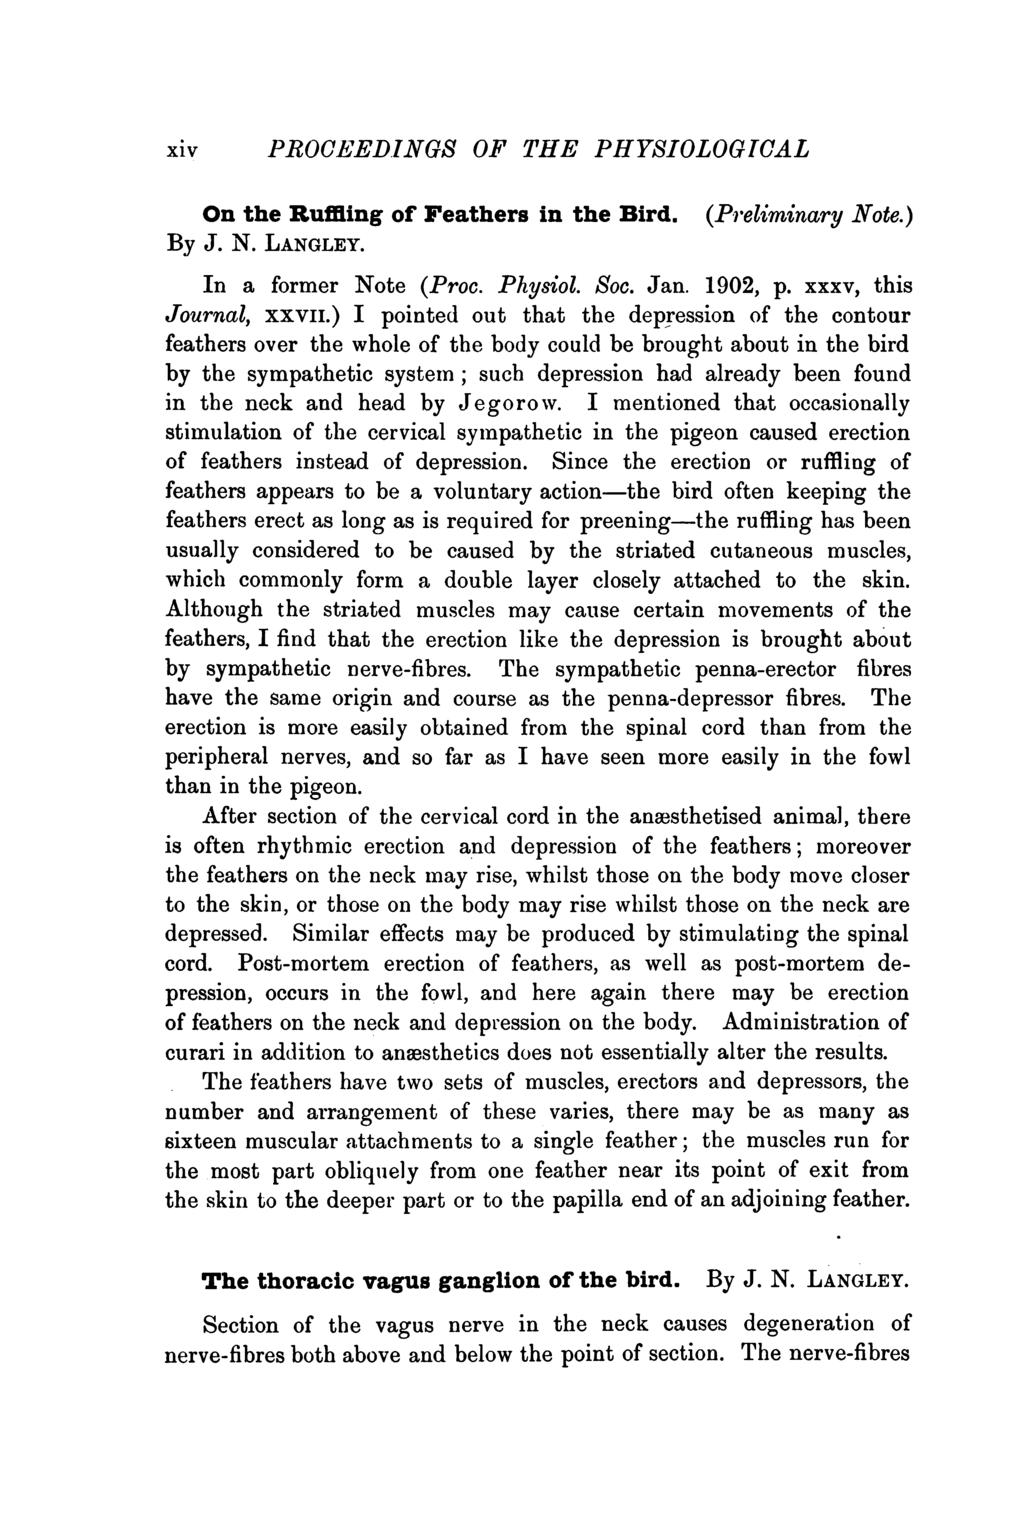 xiv PROCEEDINGS OF THE PHYSIOLOGICAL On the Ruffling of Feathers in the Bird. (Preliminary Note.) By J. N. LANGLEY. In a former Note (Proc. Physiol. Soc. Jan. 1902, p. xxxv, this Journal, xxvii.